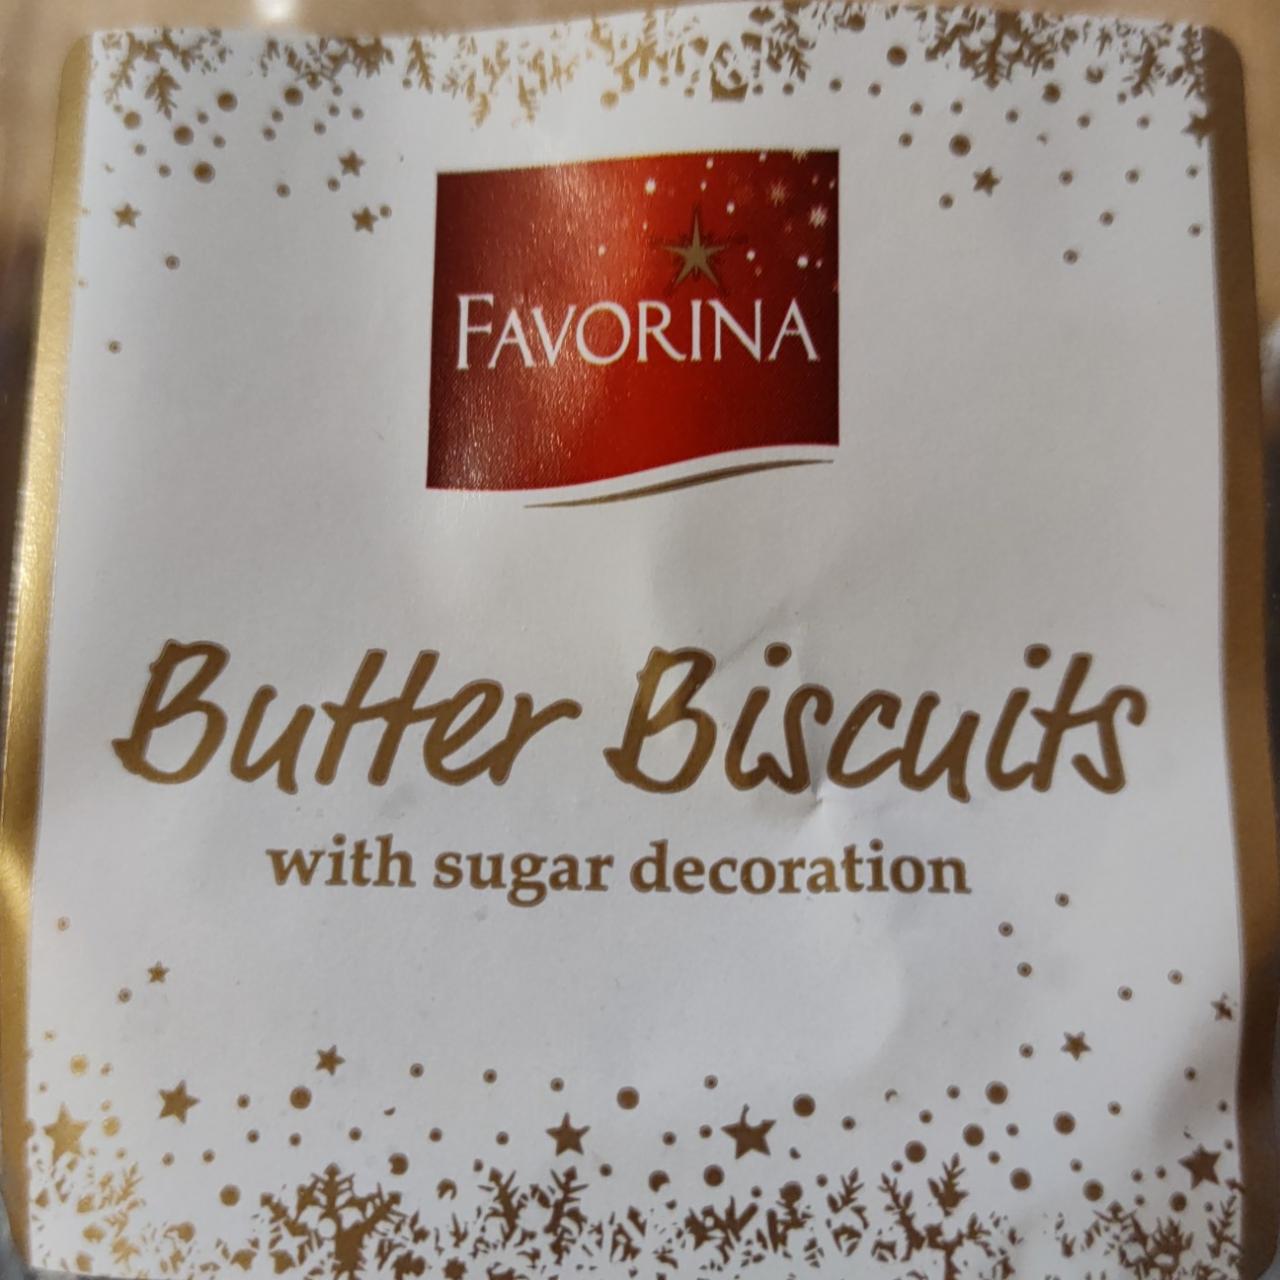 Fotografie - Butter Biscuits with sugar decorations Favorina